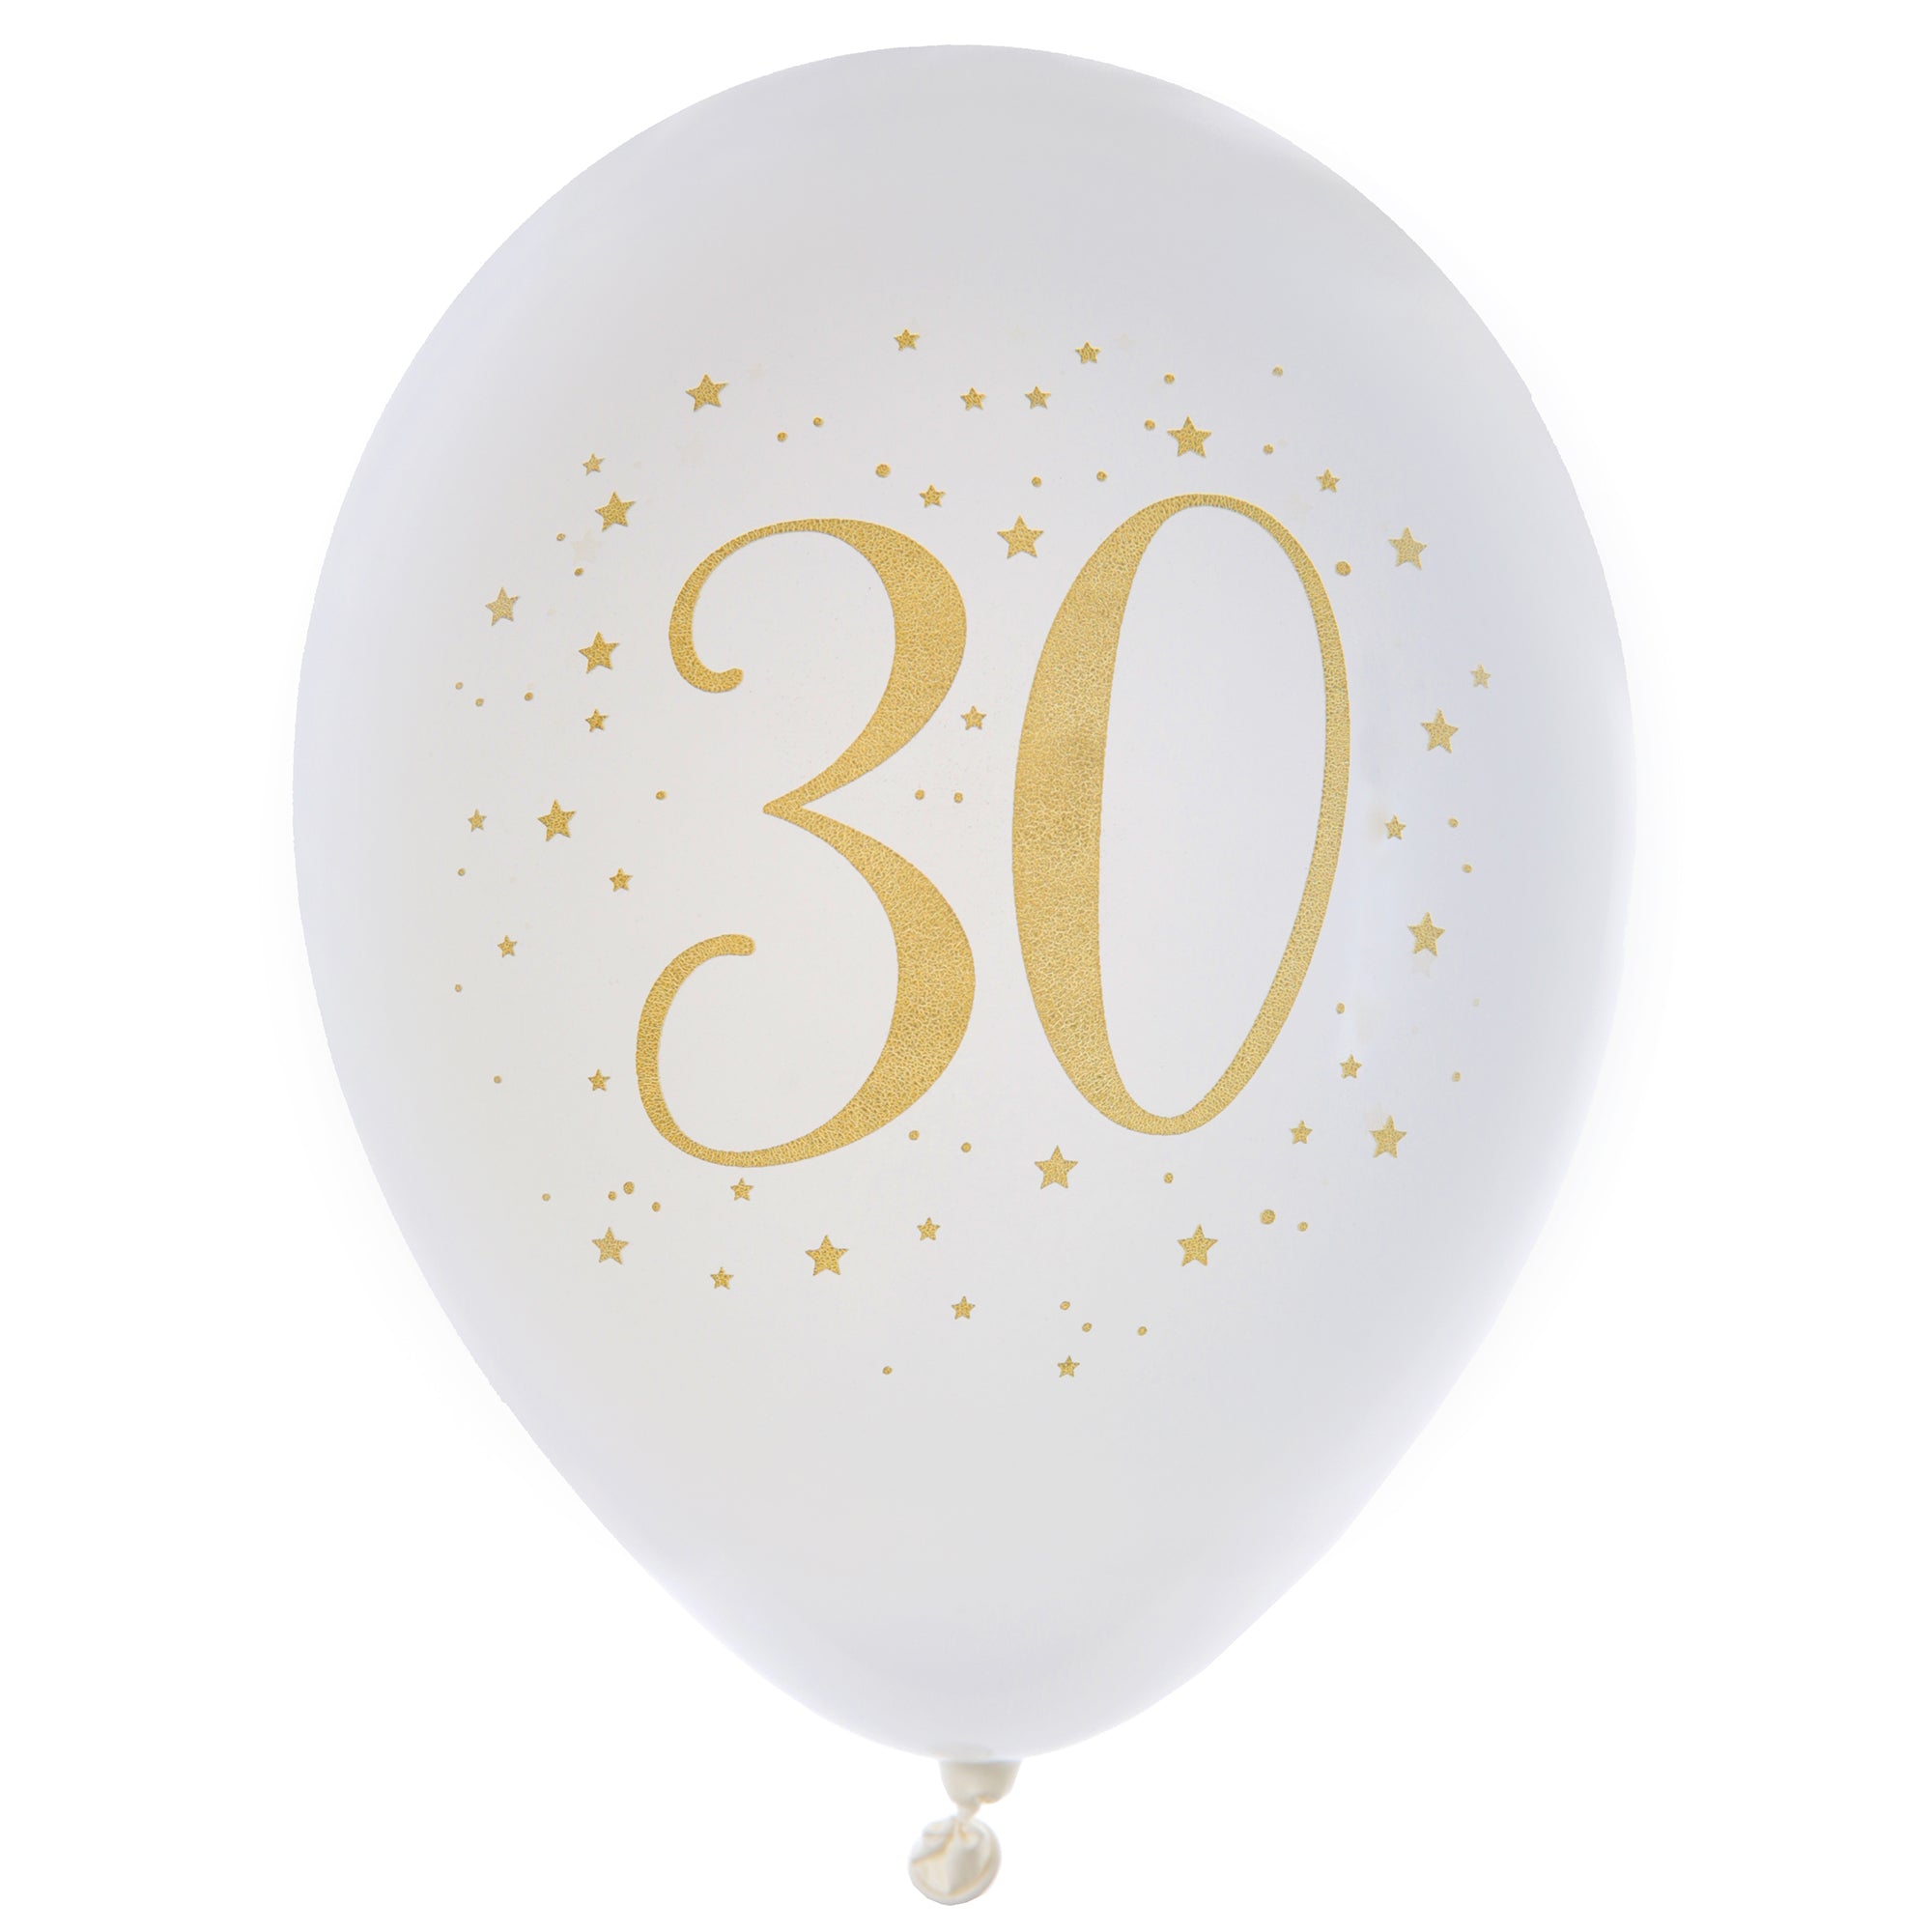 Age 30 8 Printed Latex Balloons White and Gold 9in